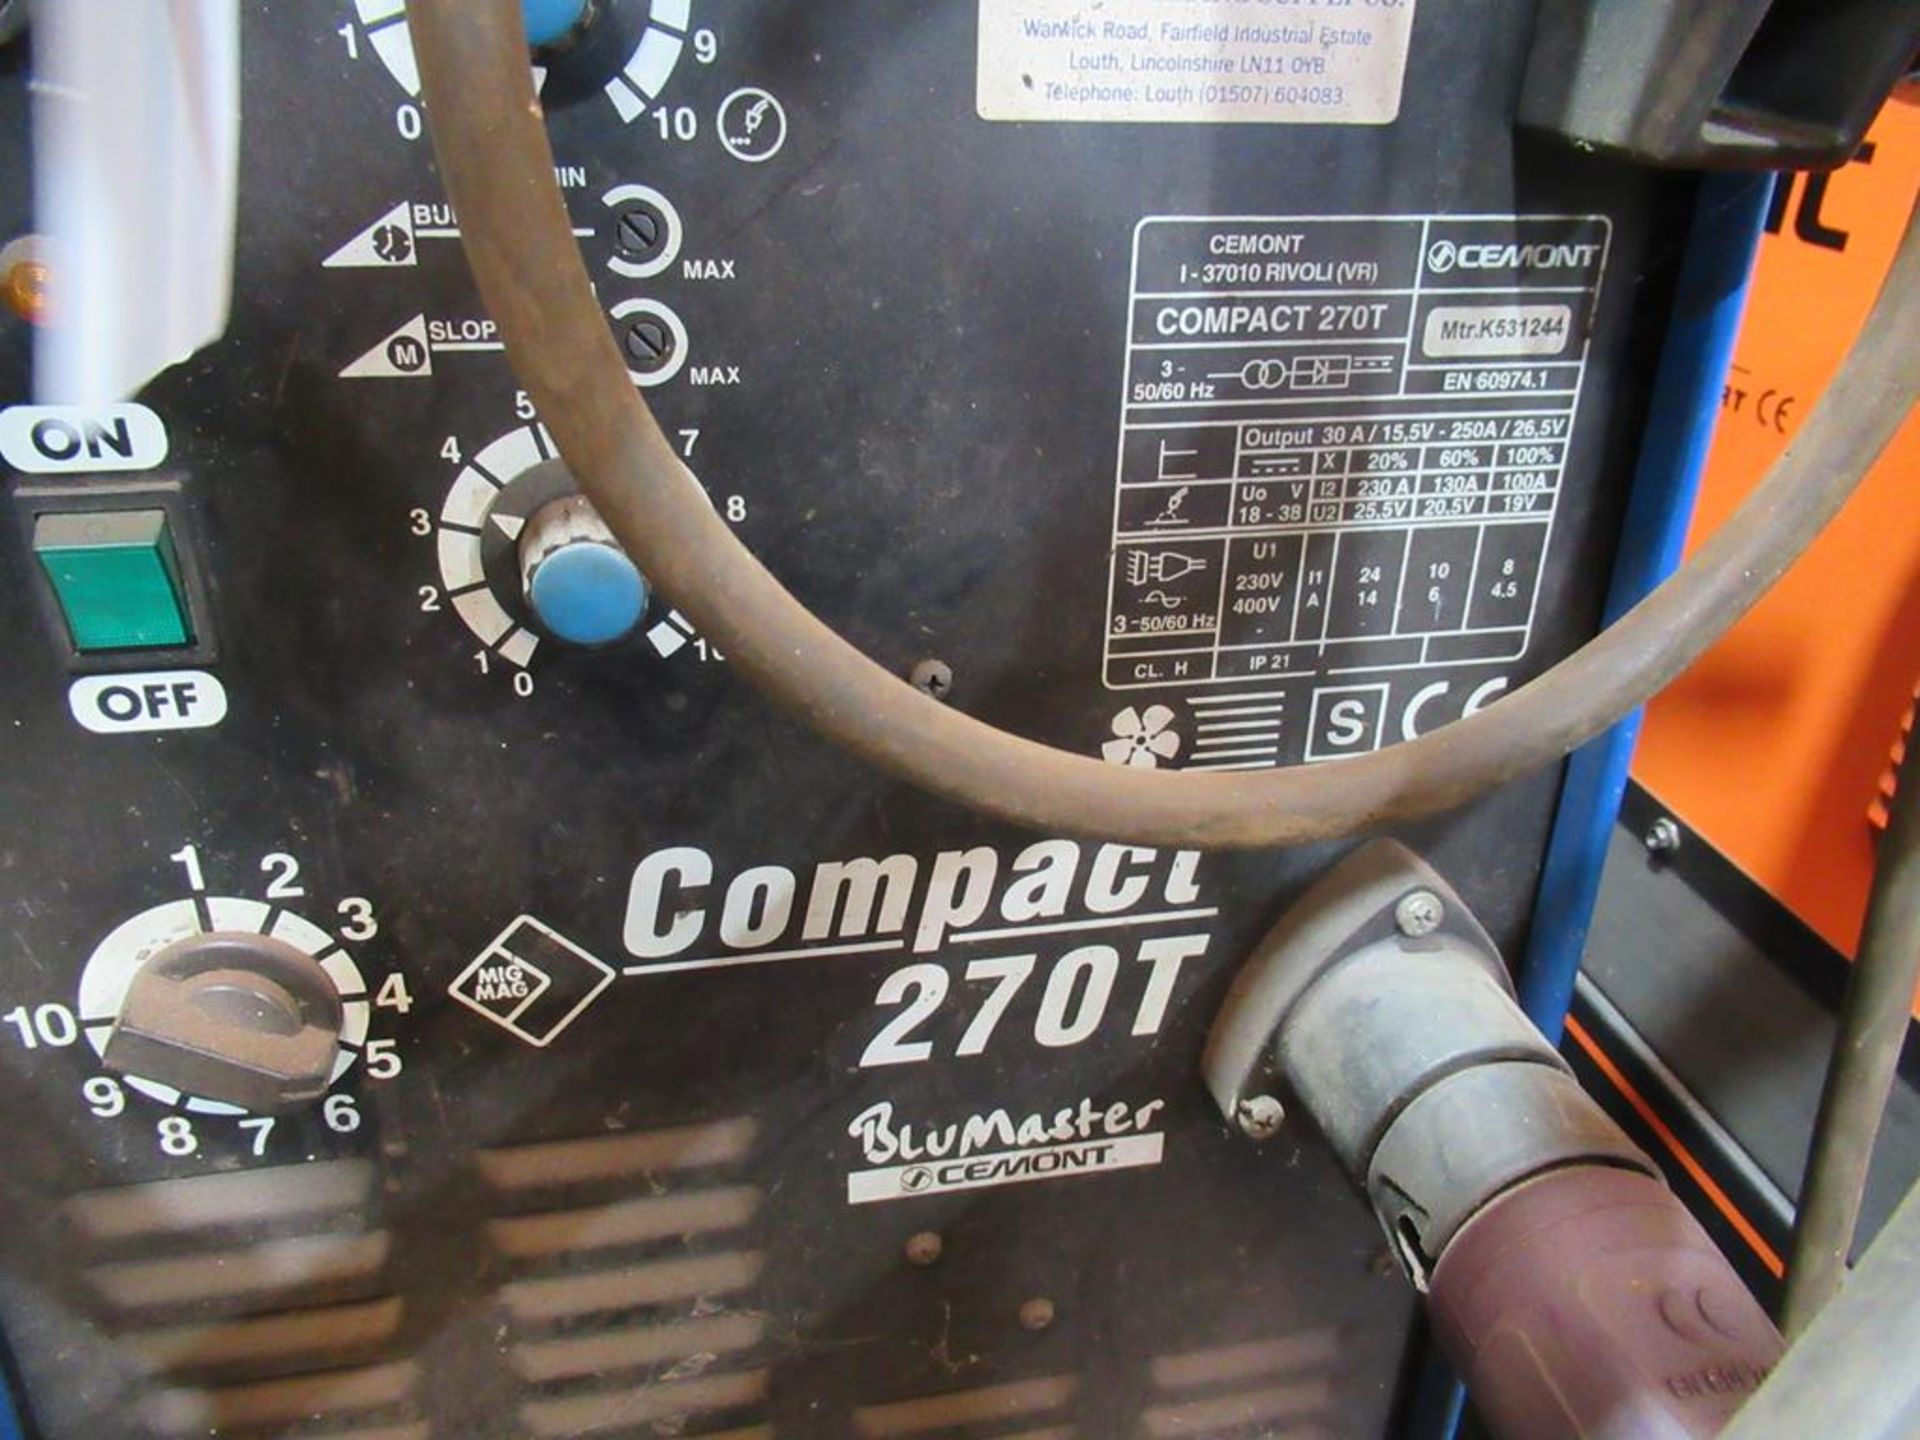 A Cemont compact 270T Bluemaster welder - Image 3 of 3